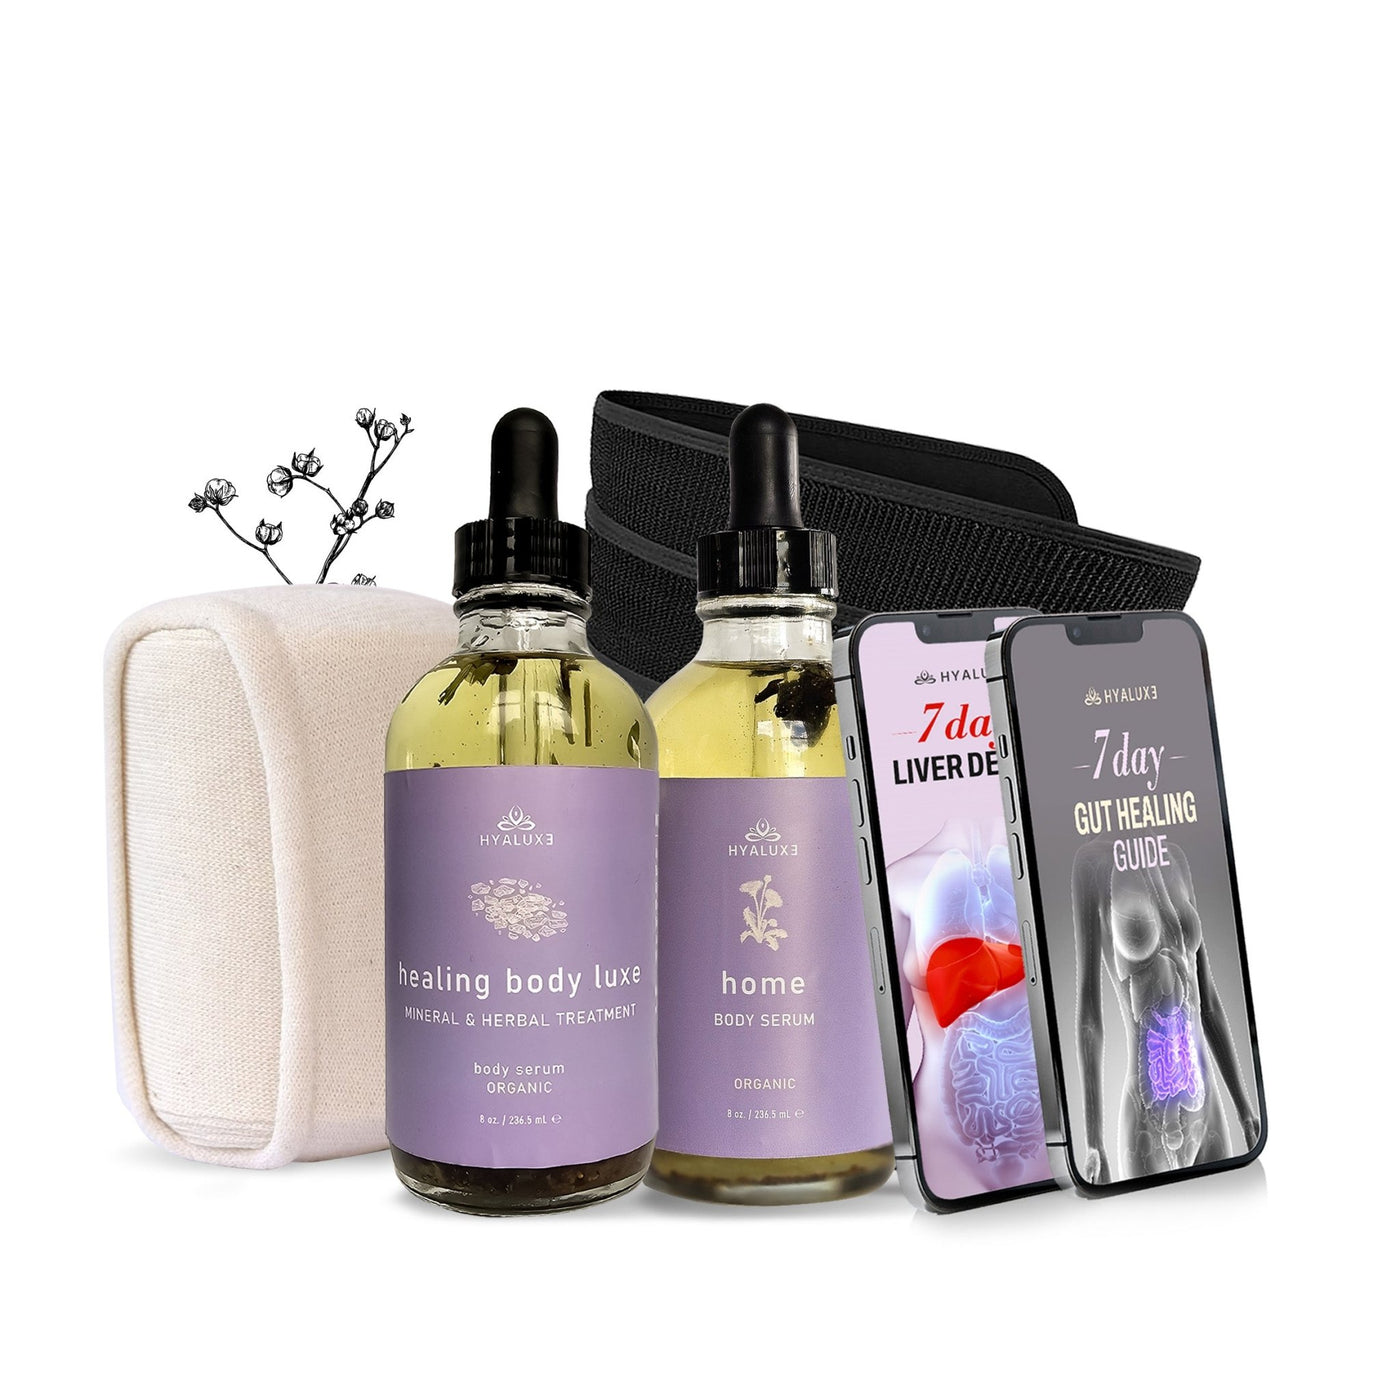 Fat Loss and Gut Healing Complete Bundle with HOME Castor Oil Serum, Mg Herbal Serum and Benefit Enhancement Wraps - Hyaluxe Body